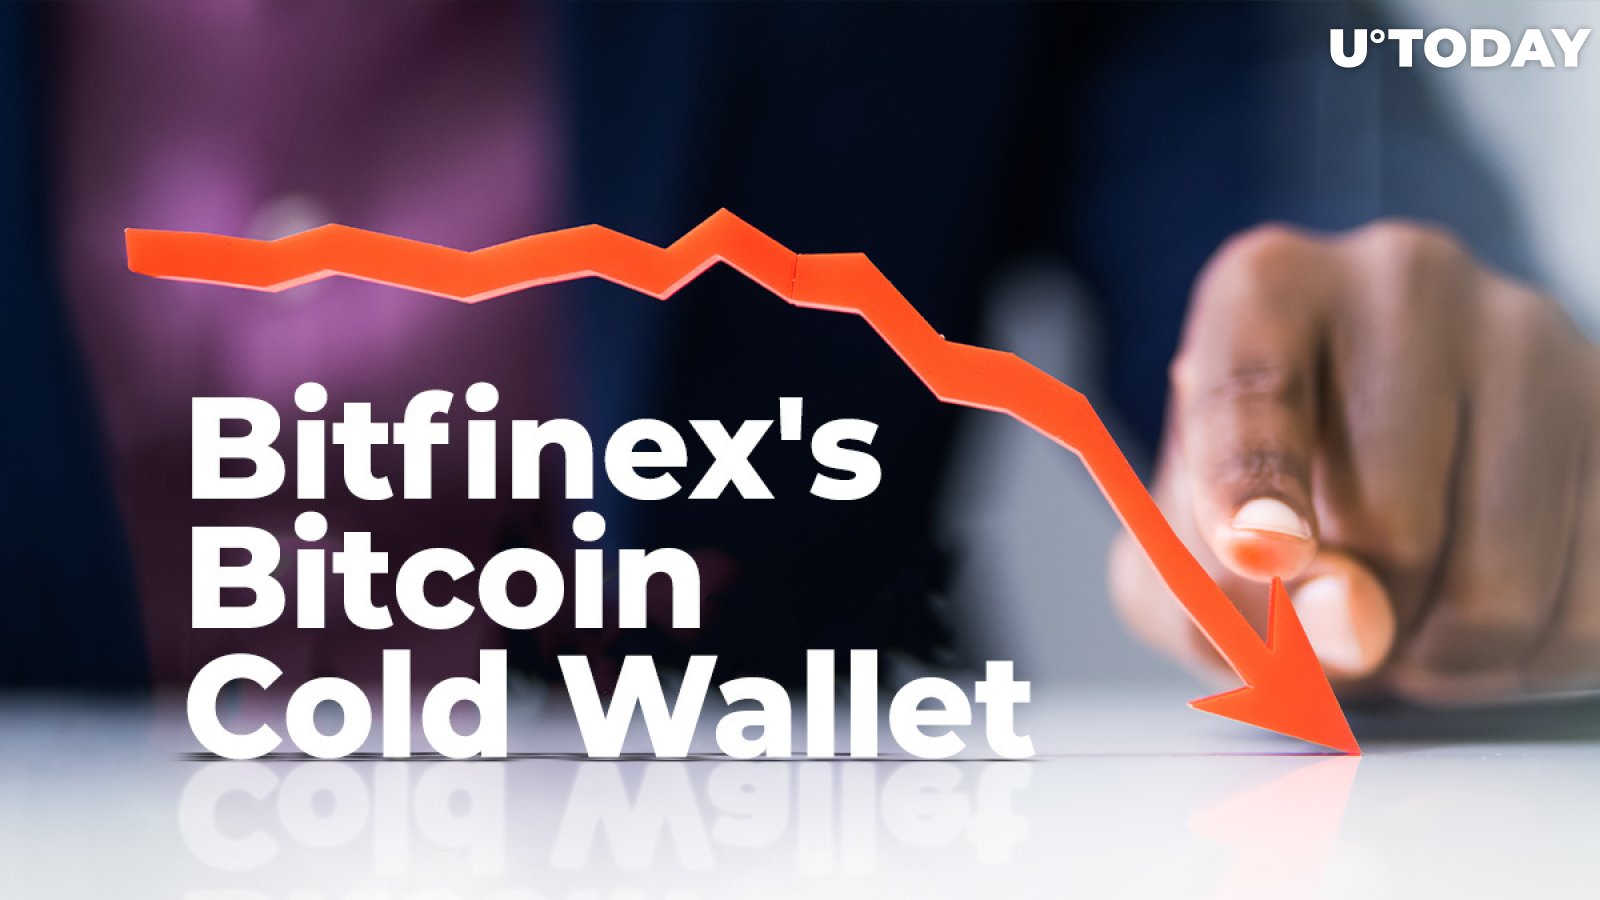 Bitfinex's Bitcoin Cold Wallet Continues to Shrink, Reaches New All-Time Low